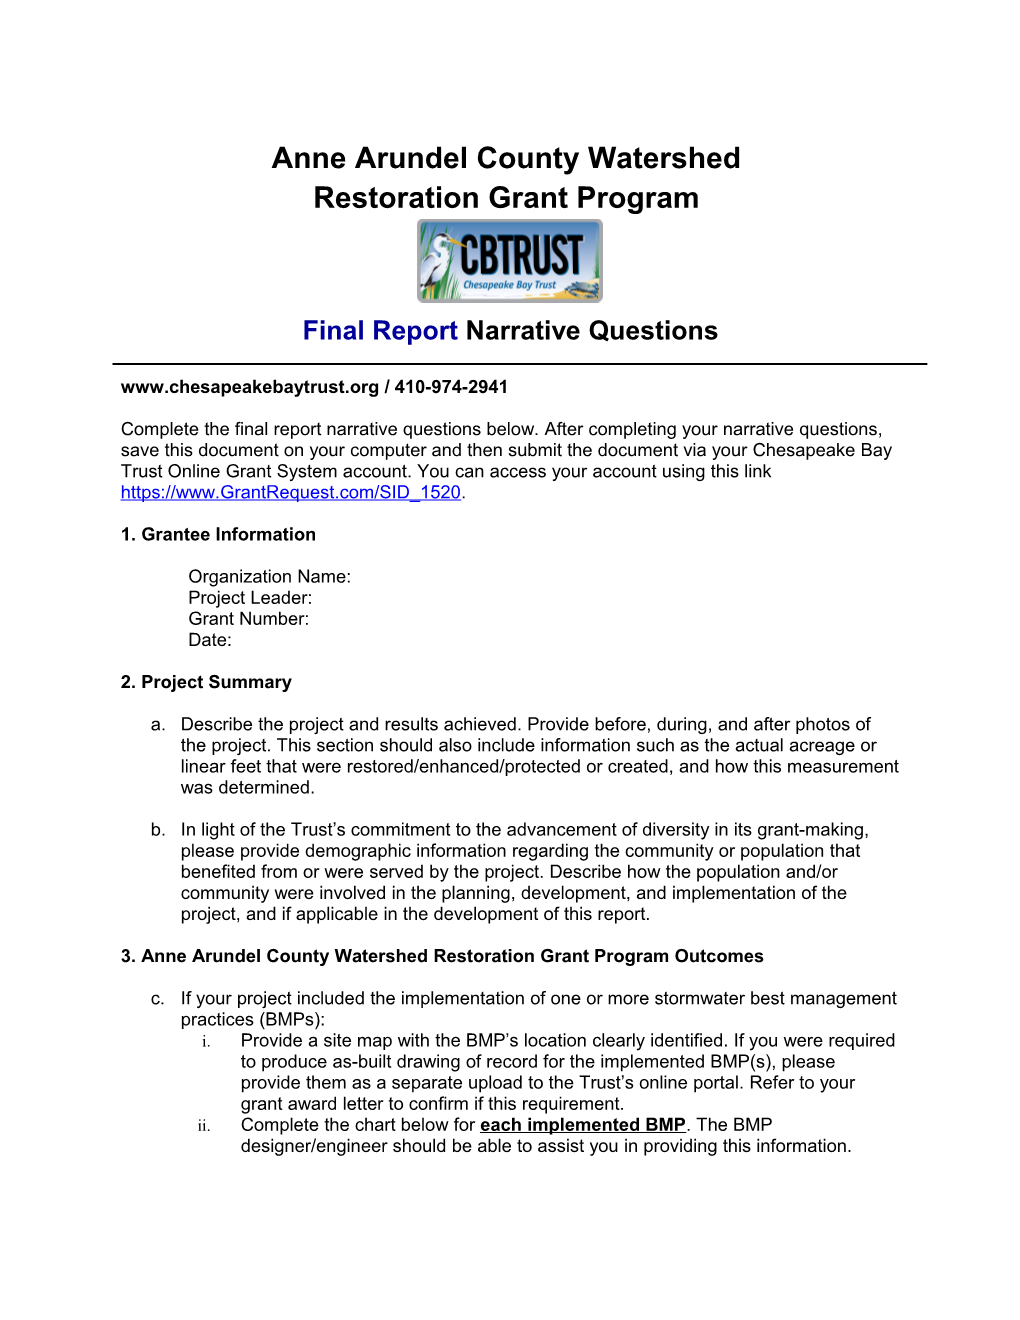 Anne Arundel County Watershed Restoration Grant Program Final Report Form Page 1 of 3